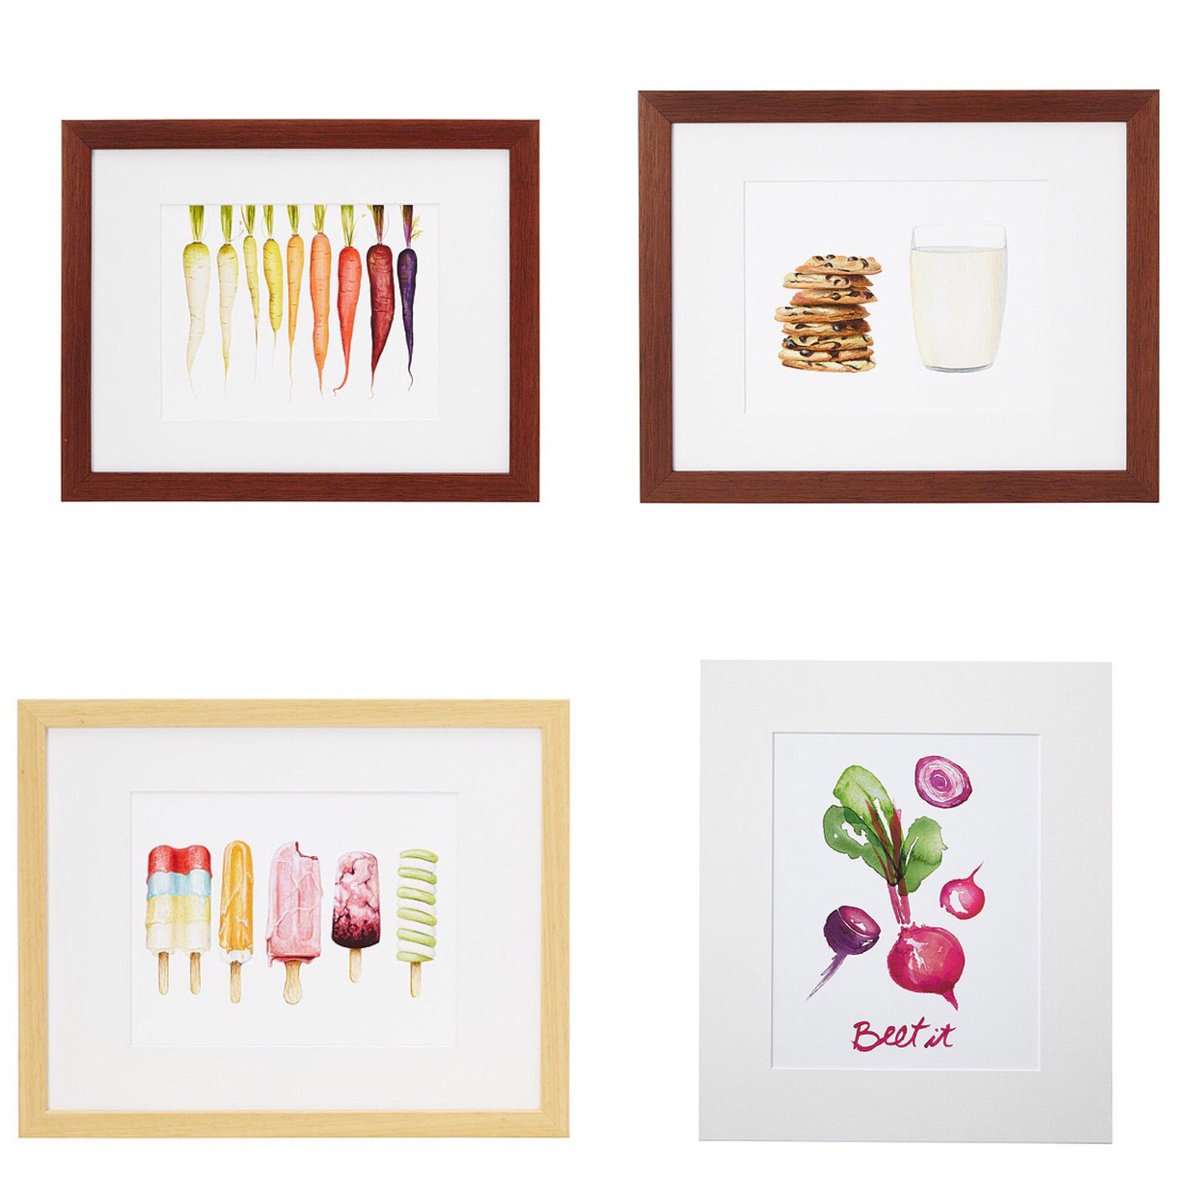 Who says the kitchen doesn’t need awesome art! Found some great prints on uncommongoods.com while browsing tonight #kitchenartwork #foodart #uncommongoods